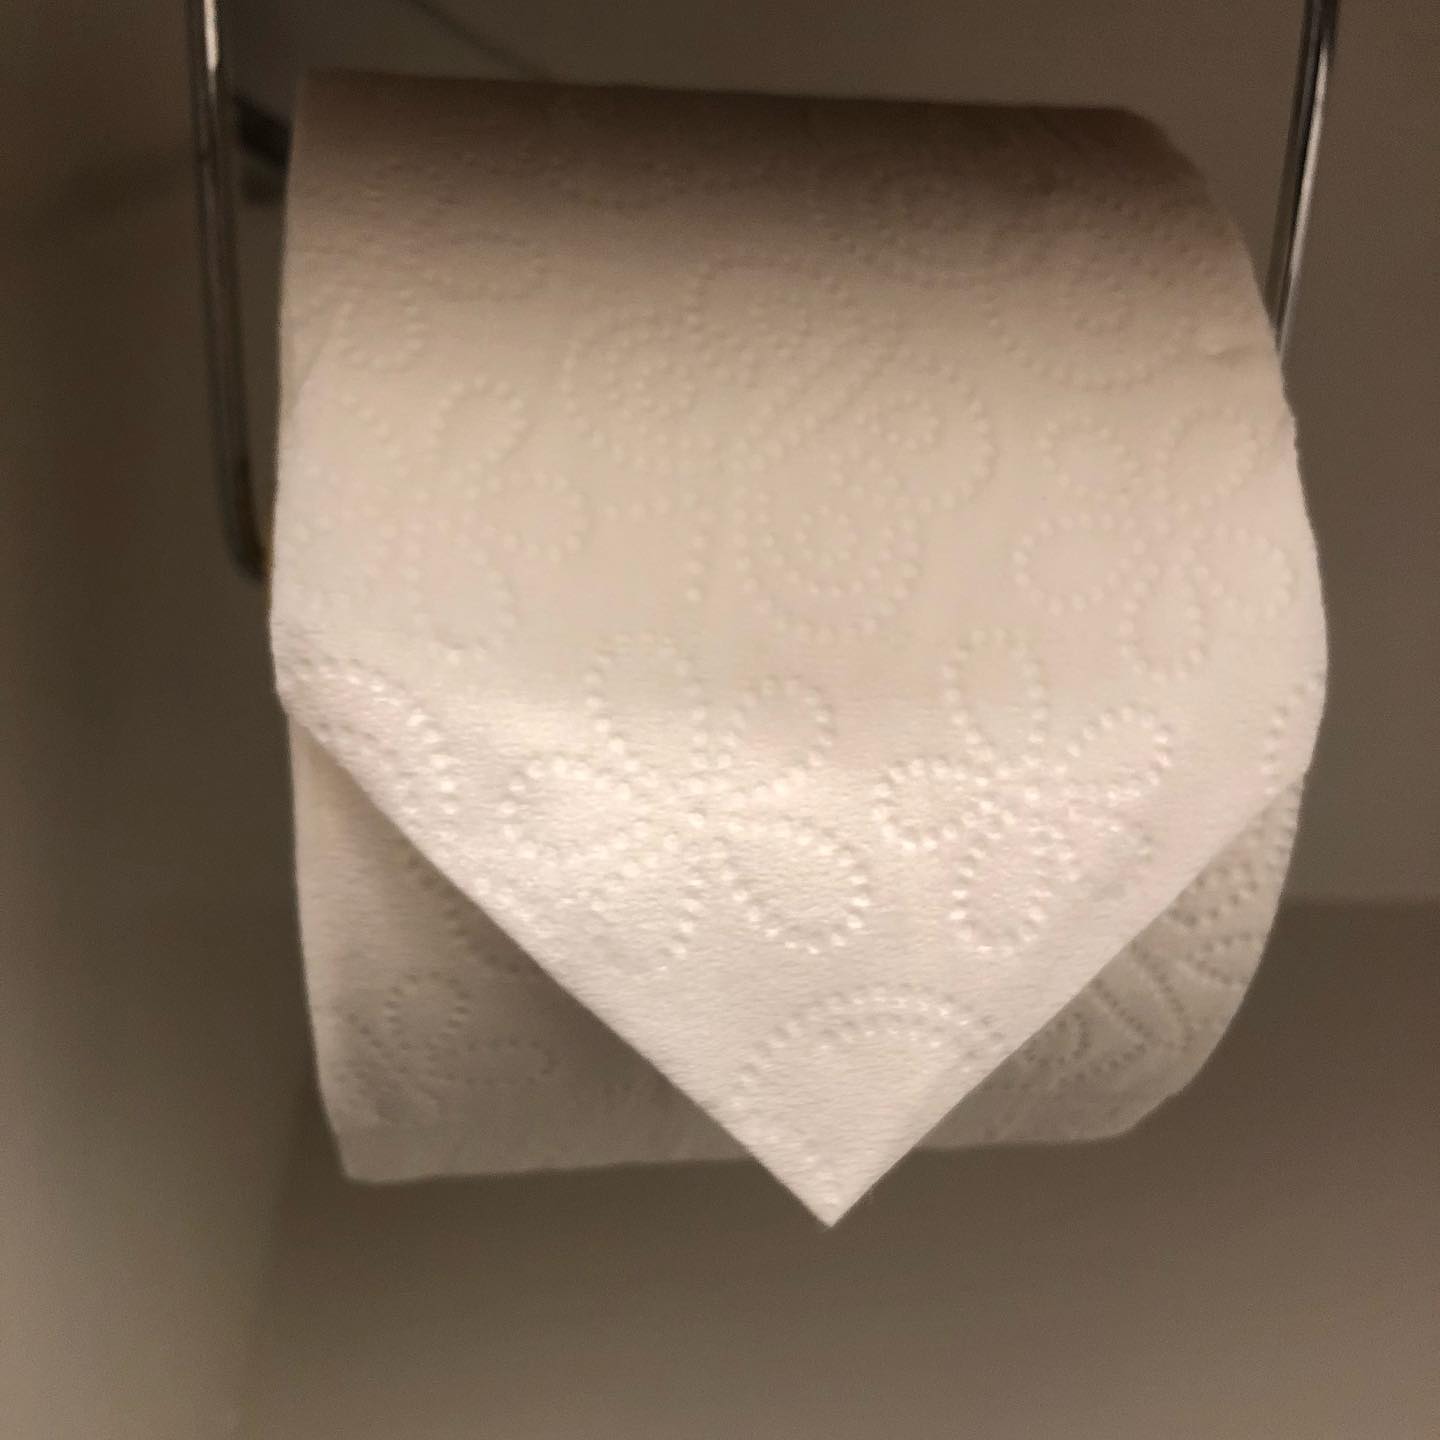 Christmas guests = tapered toilet paper. Once you design for experiences, you can’t go back. The details show you care.